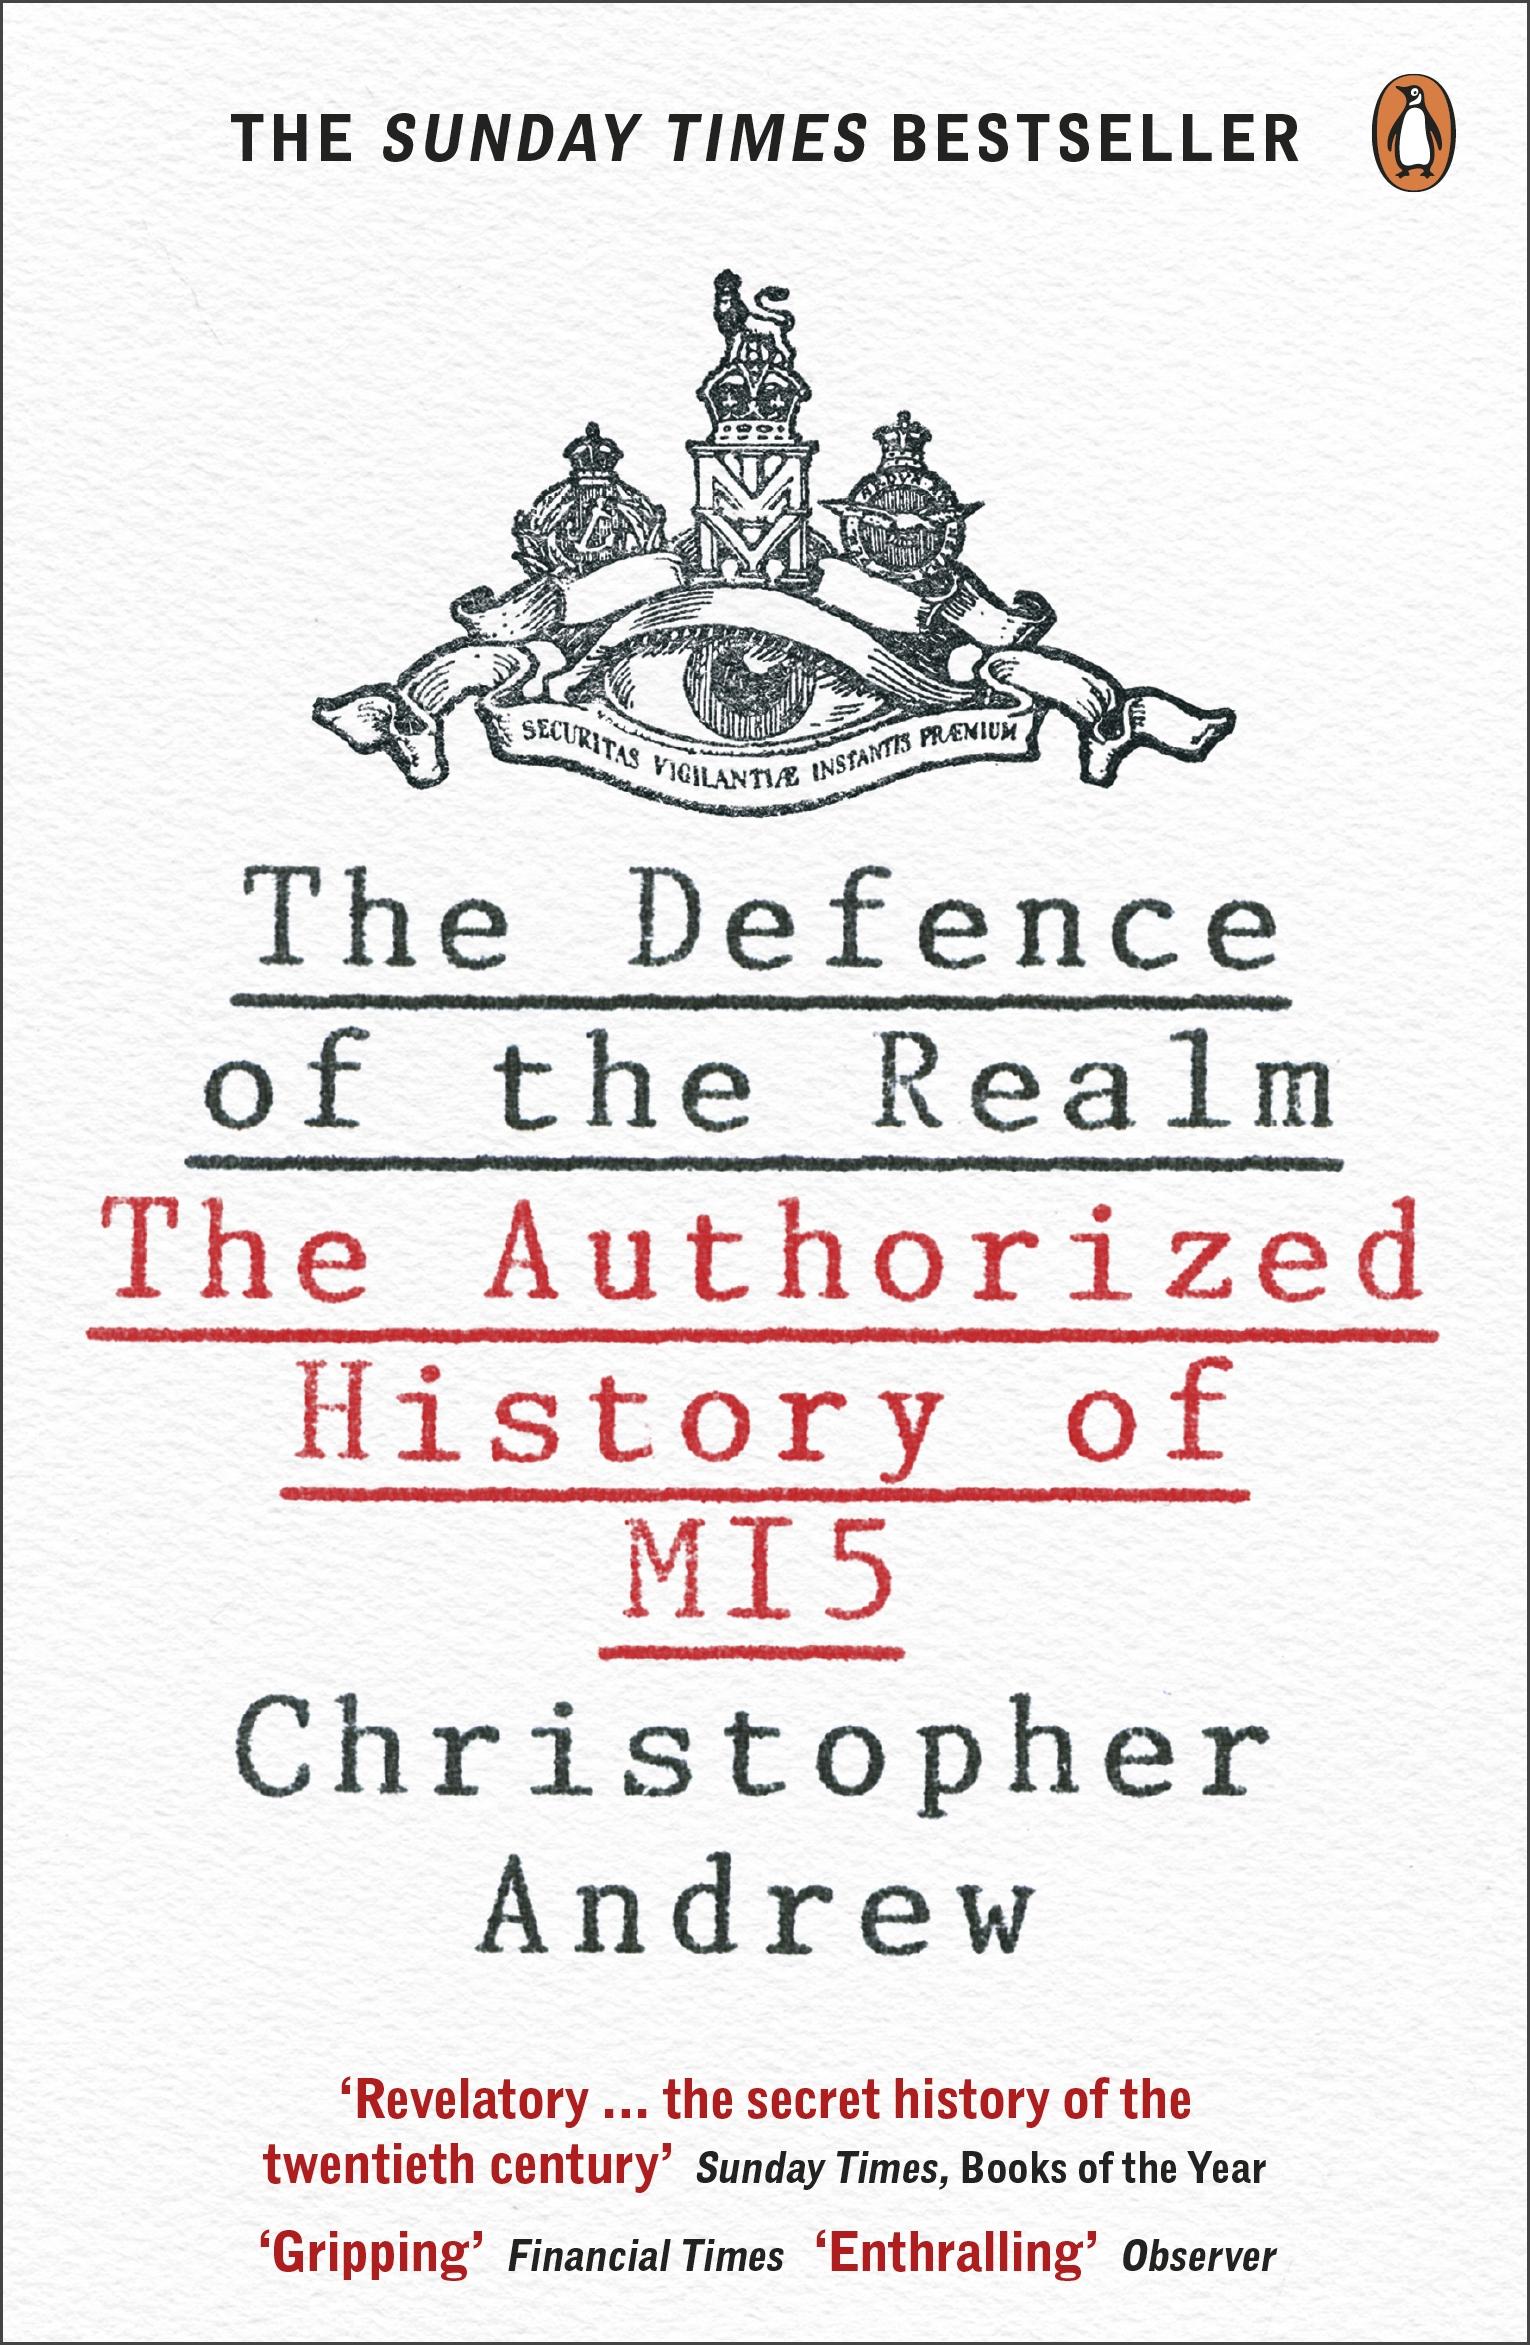 The Defence of the Realm / The Authorized History of MI5 / Christopher Andrew / Taschenbuch / Kartoniert / Broschiert / Englisch / 2010 / Penguin Books Ltd / EAN 9780141023304 - Andrew, Christopher